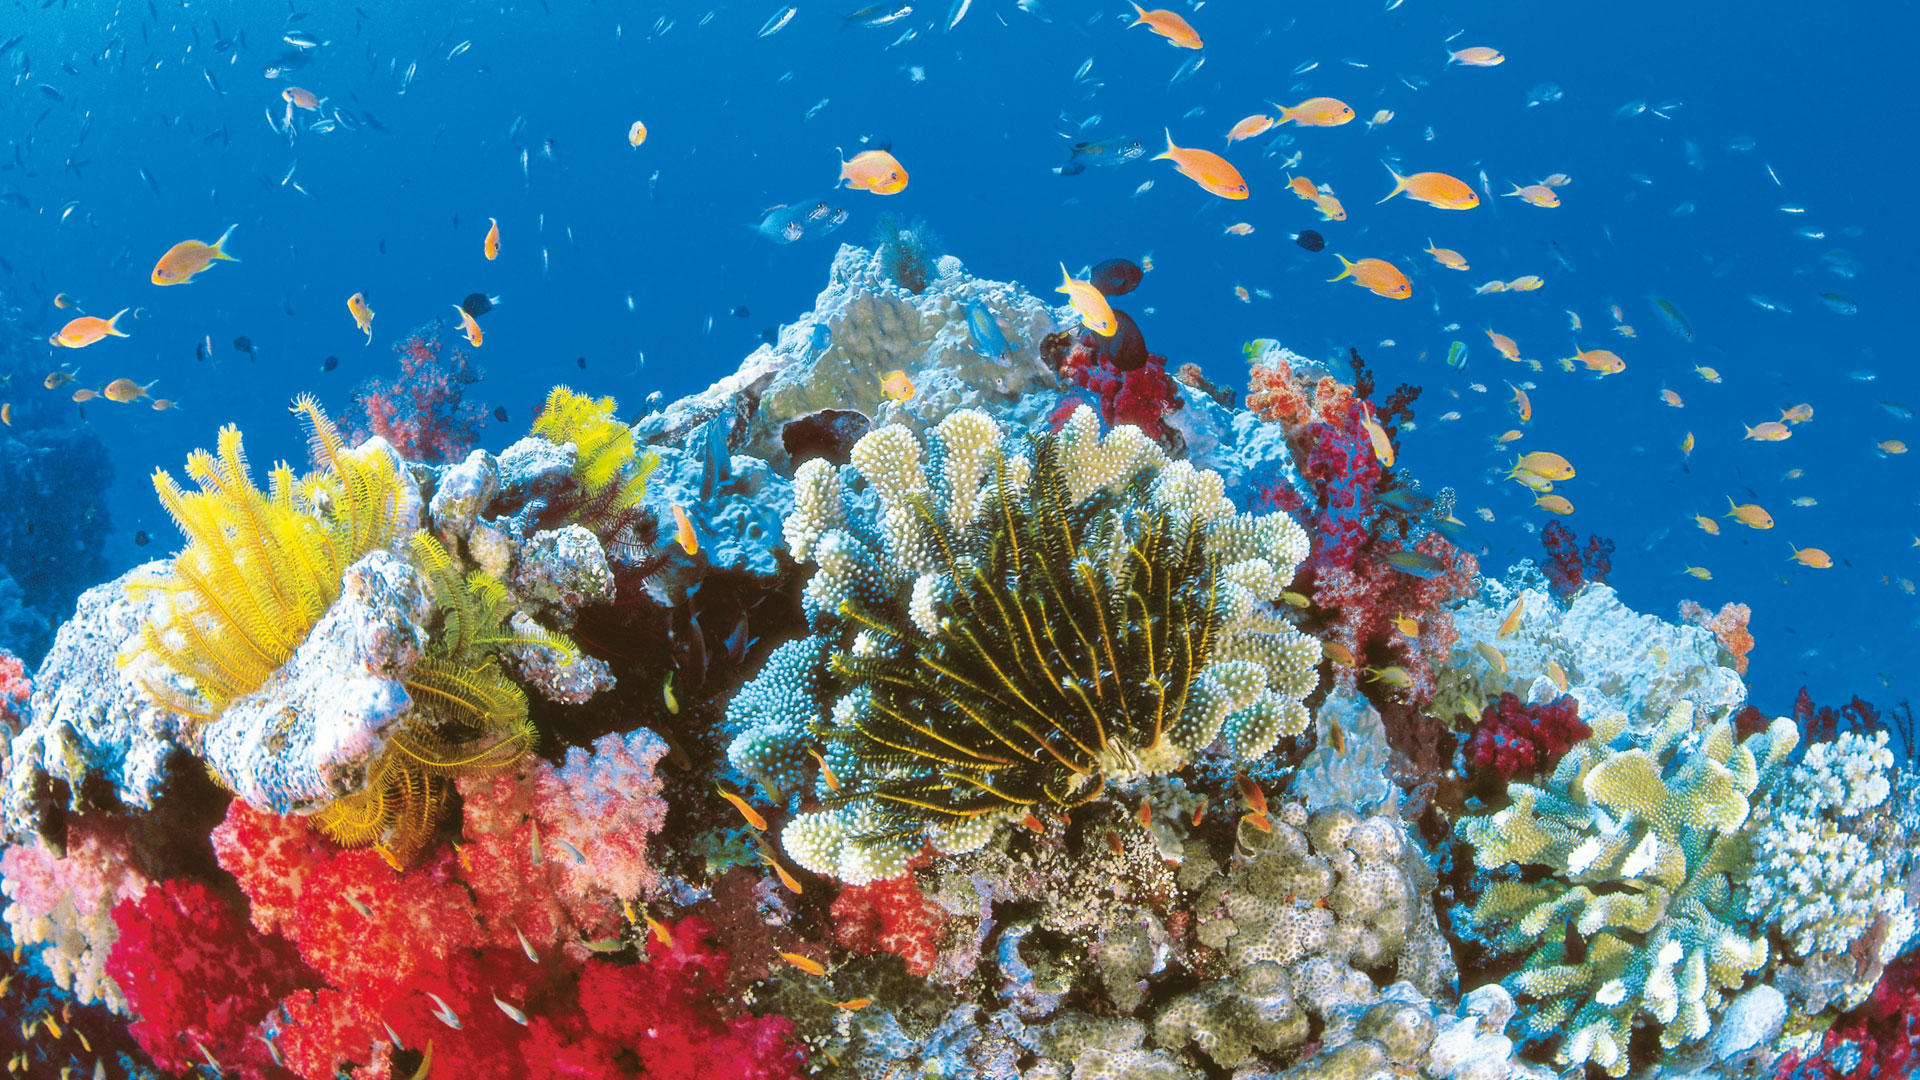 8k Great Barrier Reef Images